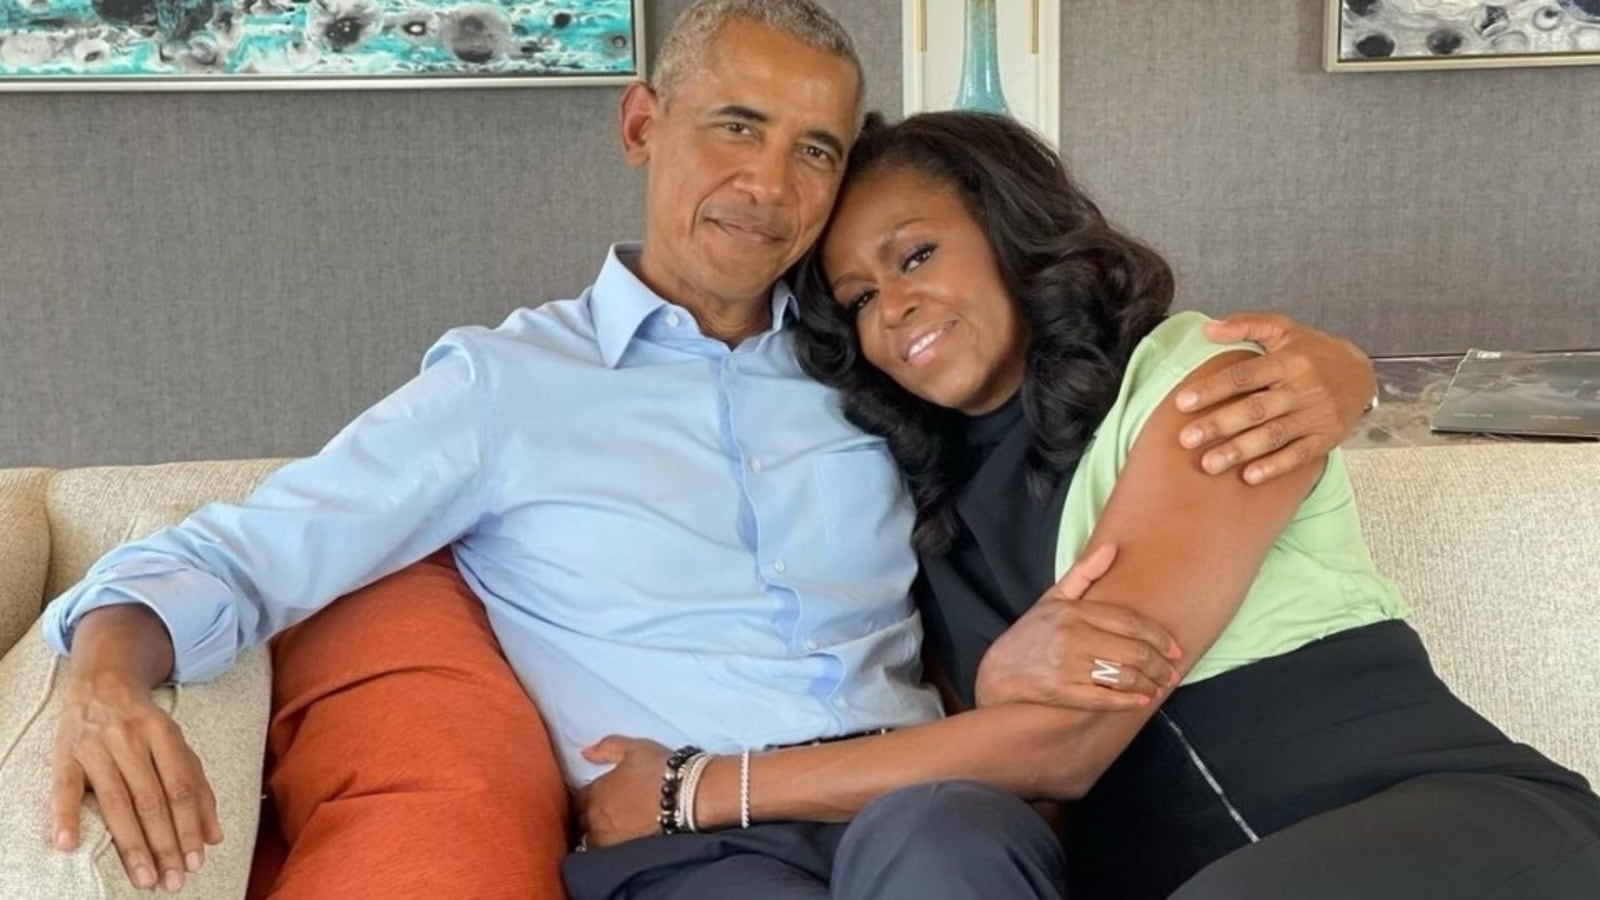 Barack Obama says he can't imagine life without Michelle Obama on 29th